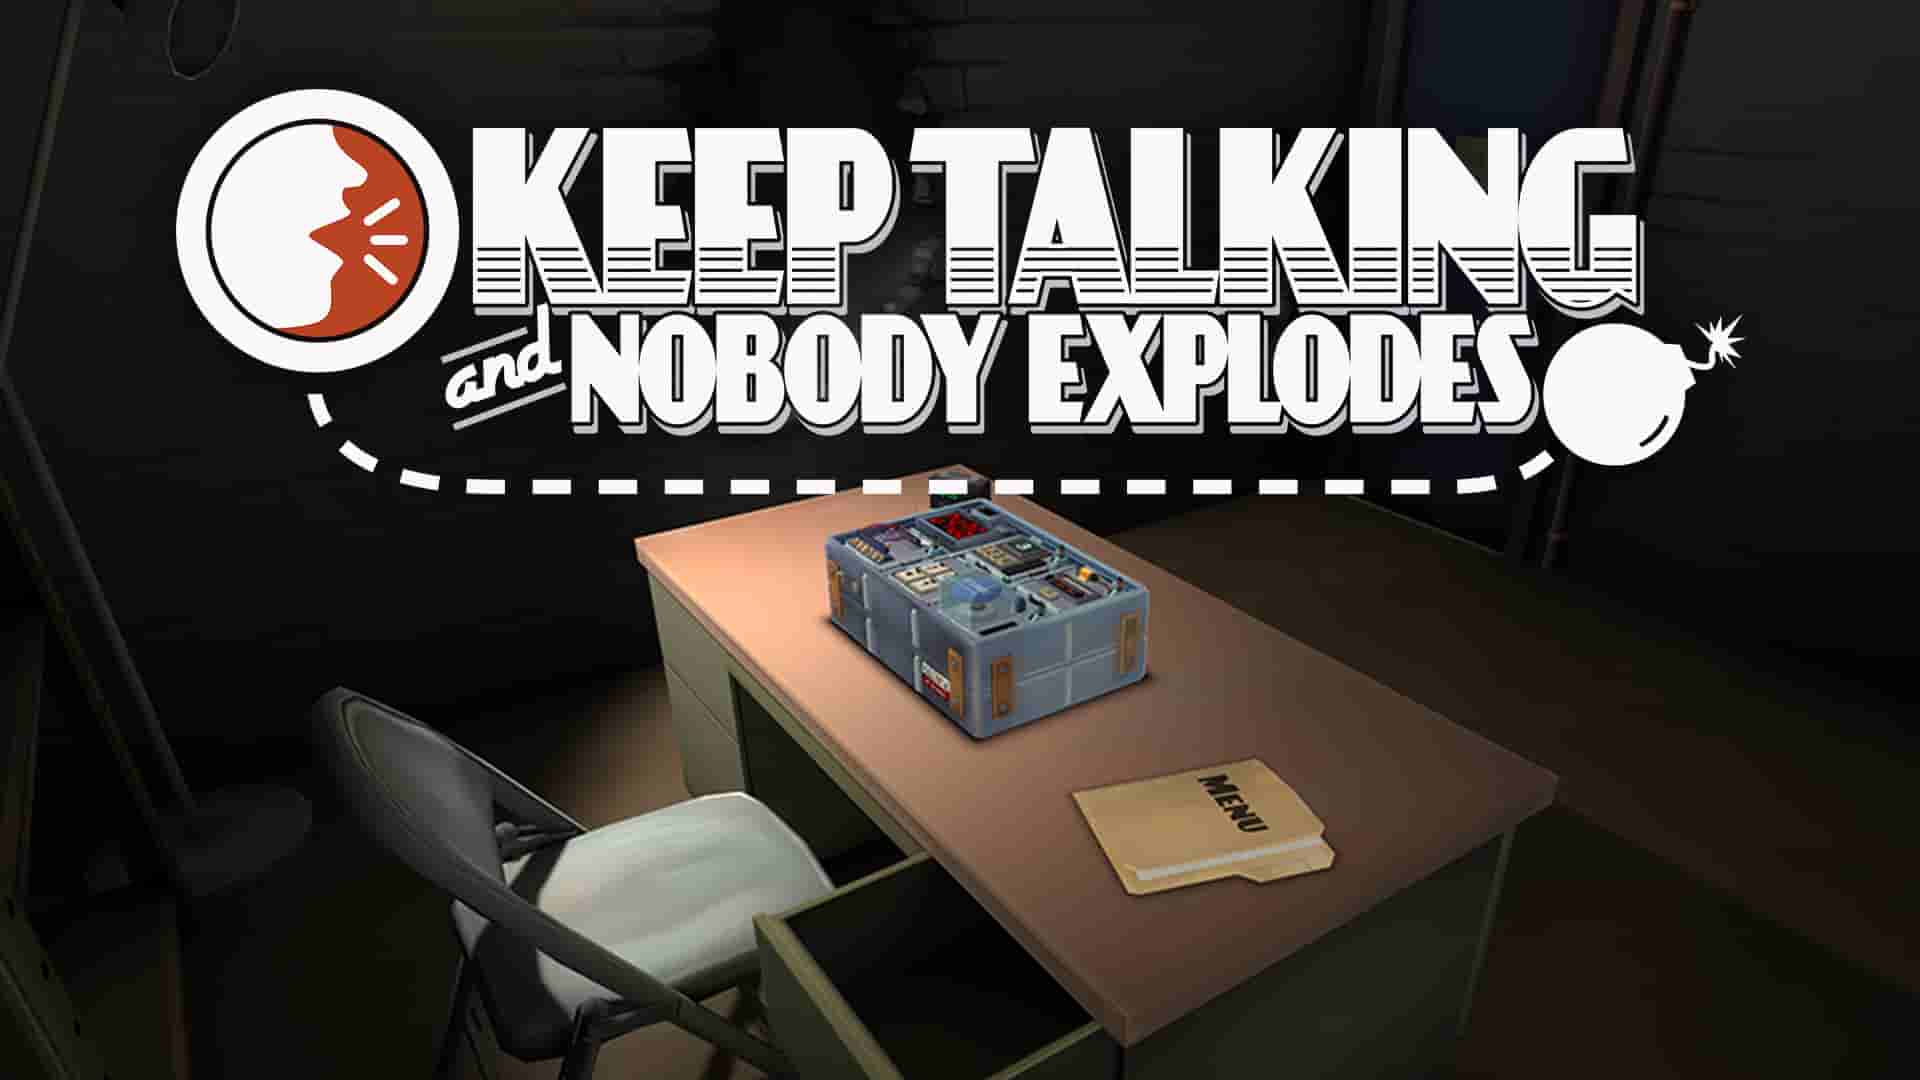 Keep Talking and Nobody Explodes( 没人会被炸掉 )